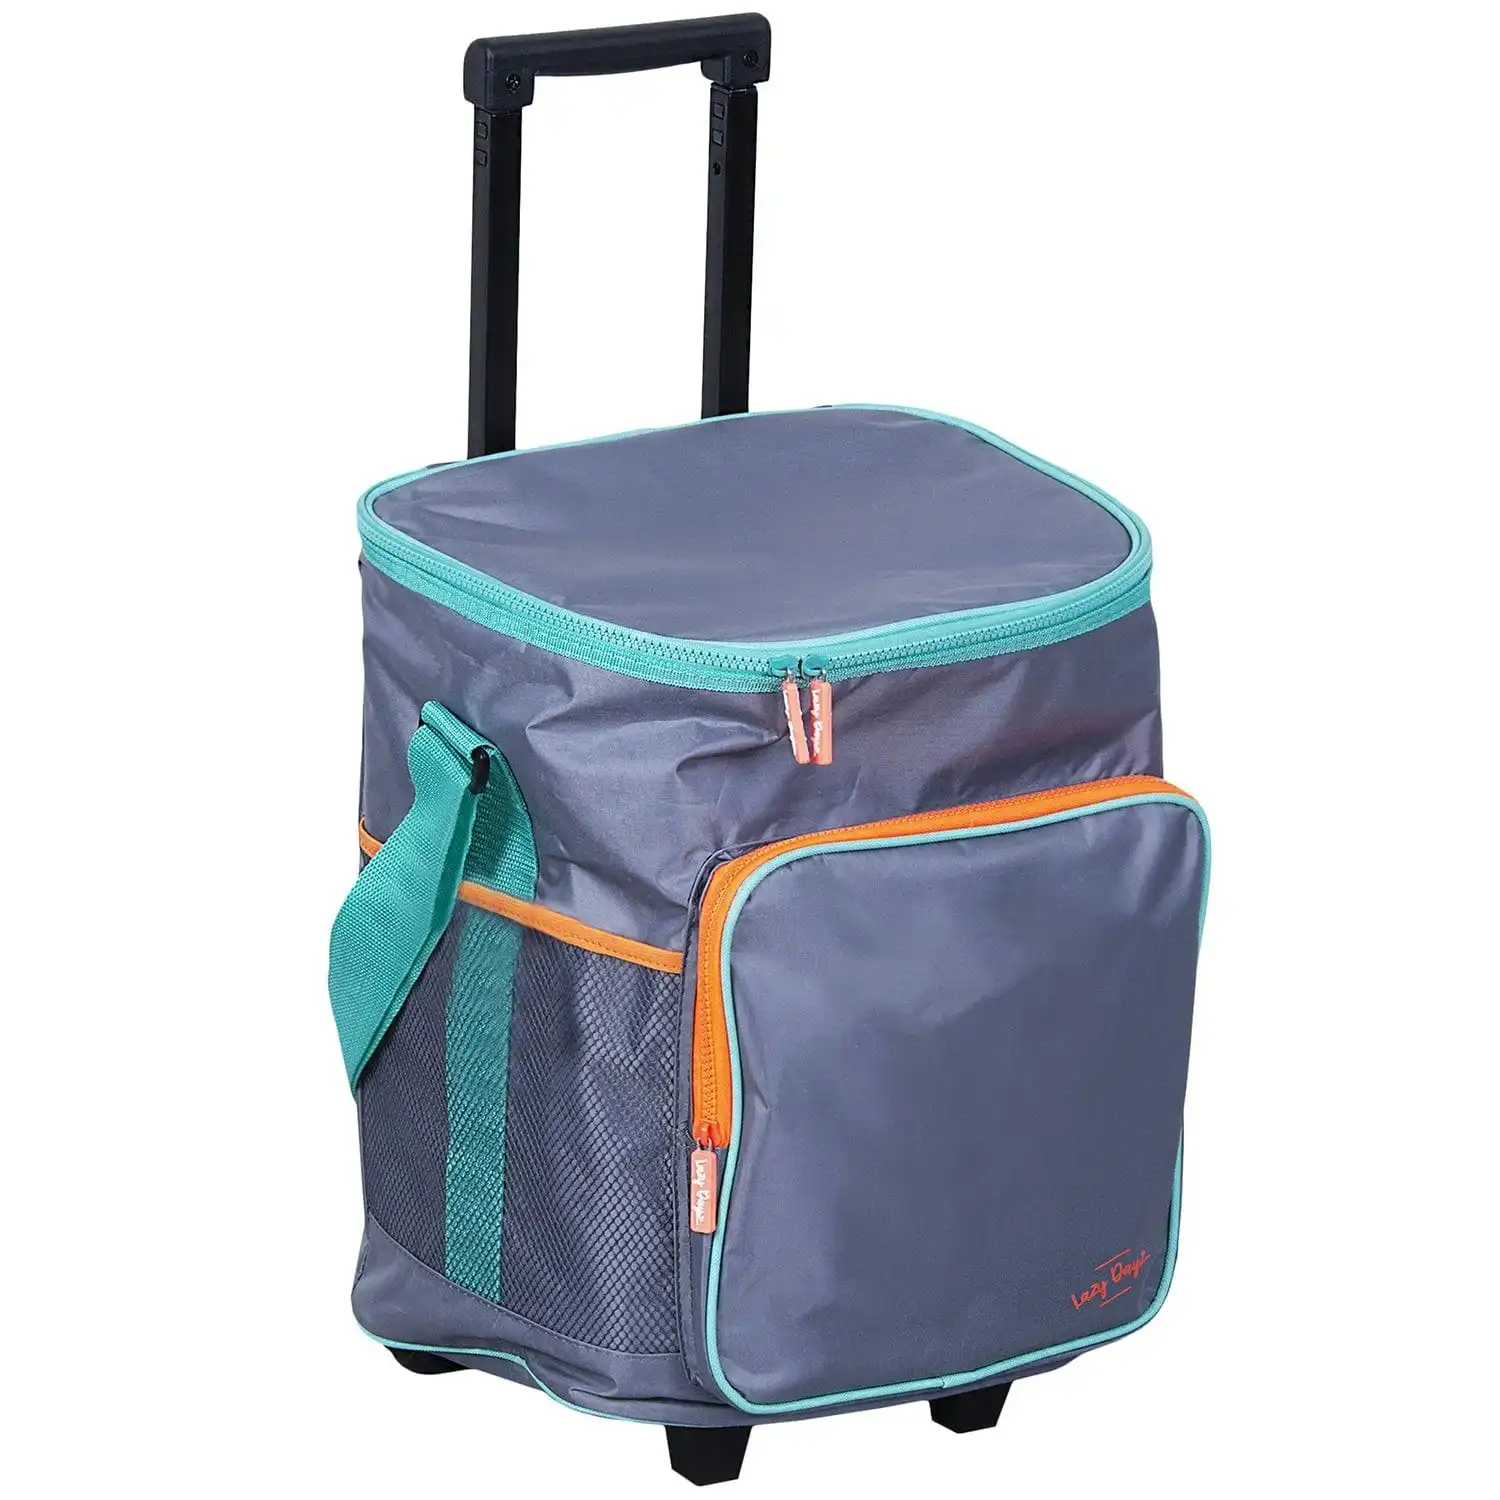 Lazy Dayz Insulated Jumbo Trolley Cooler